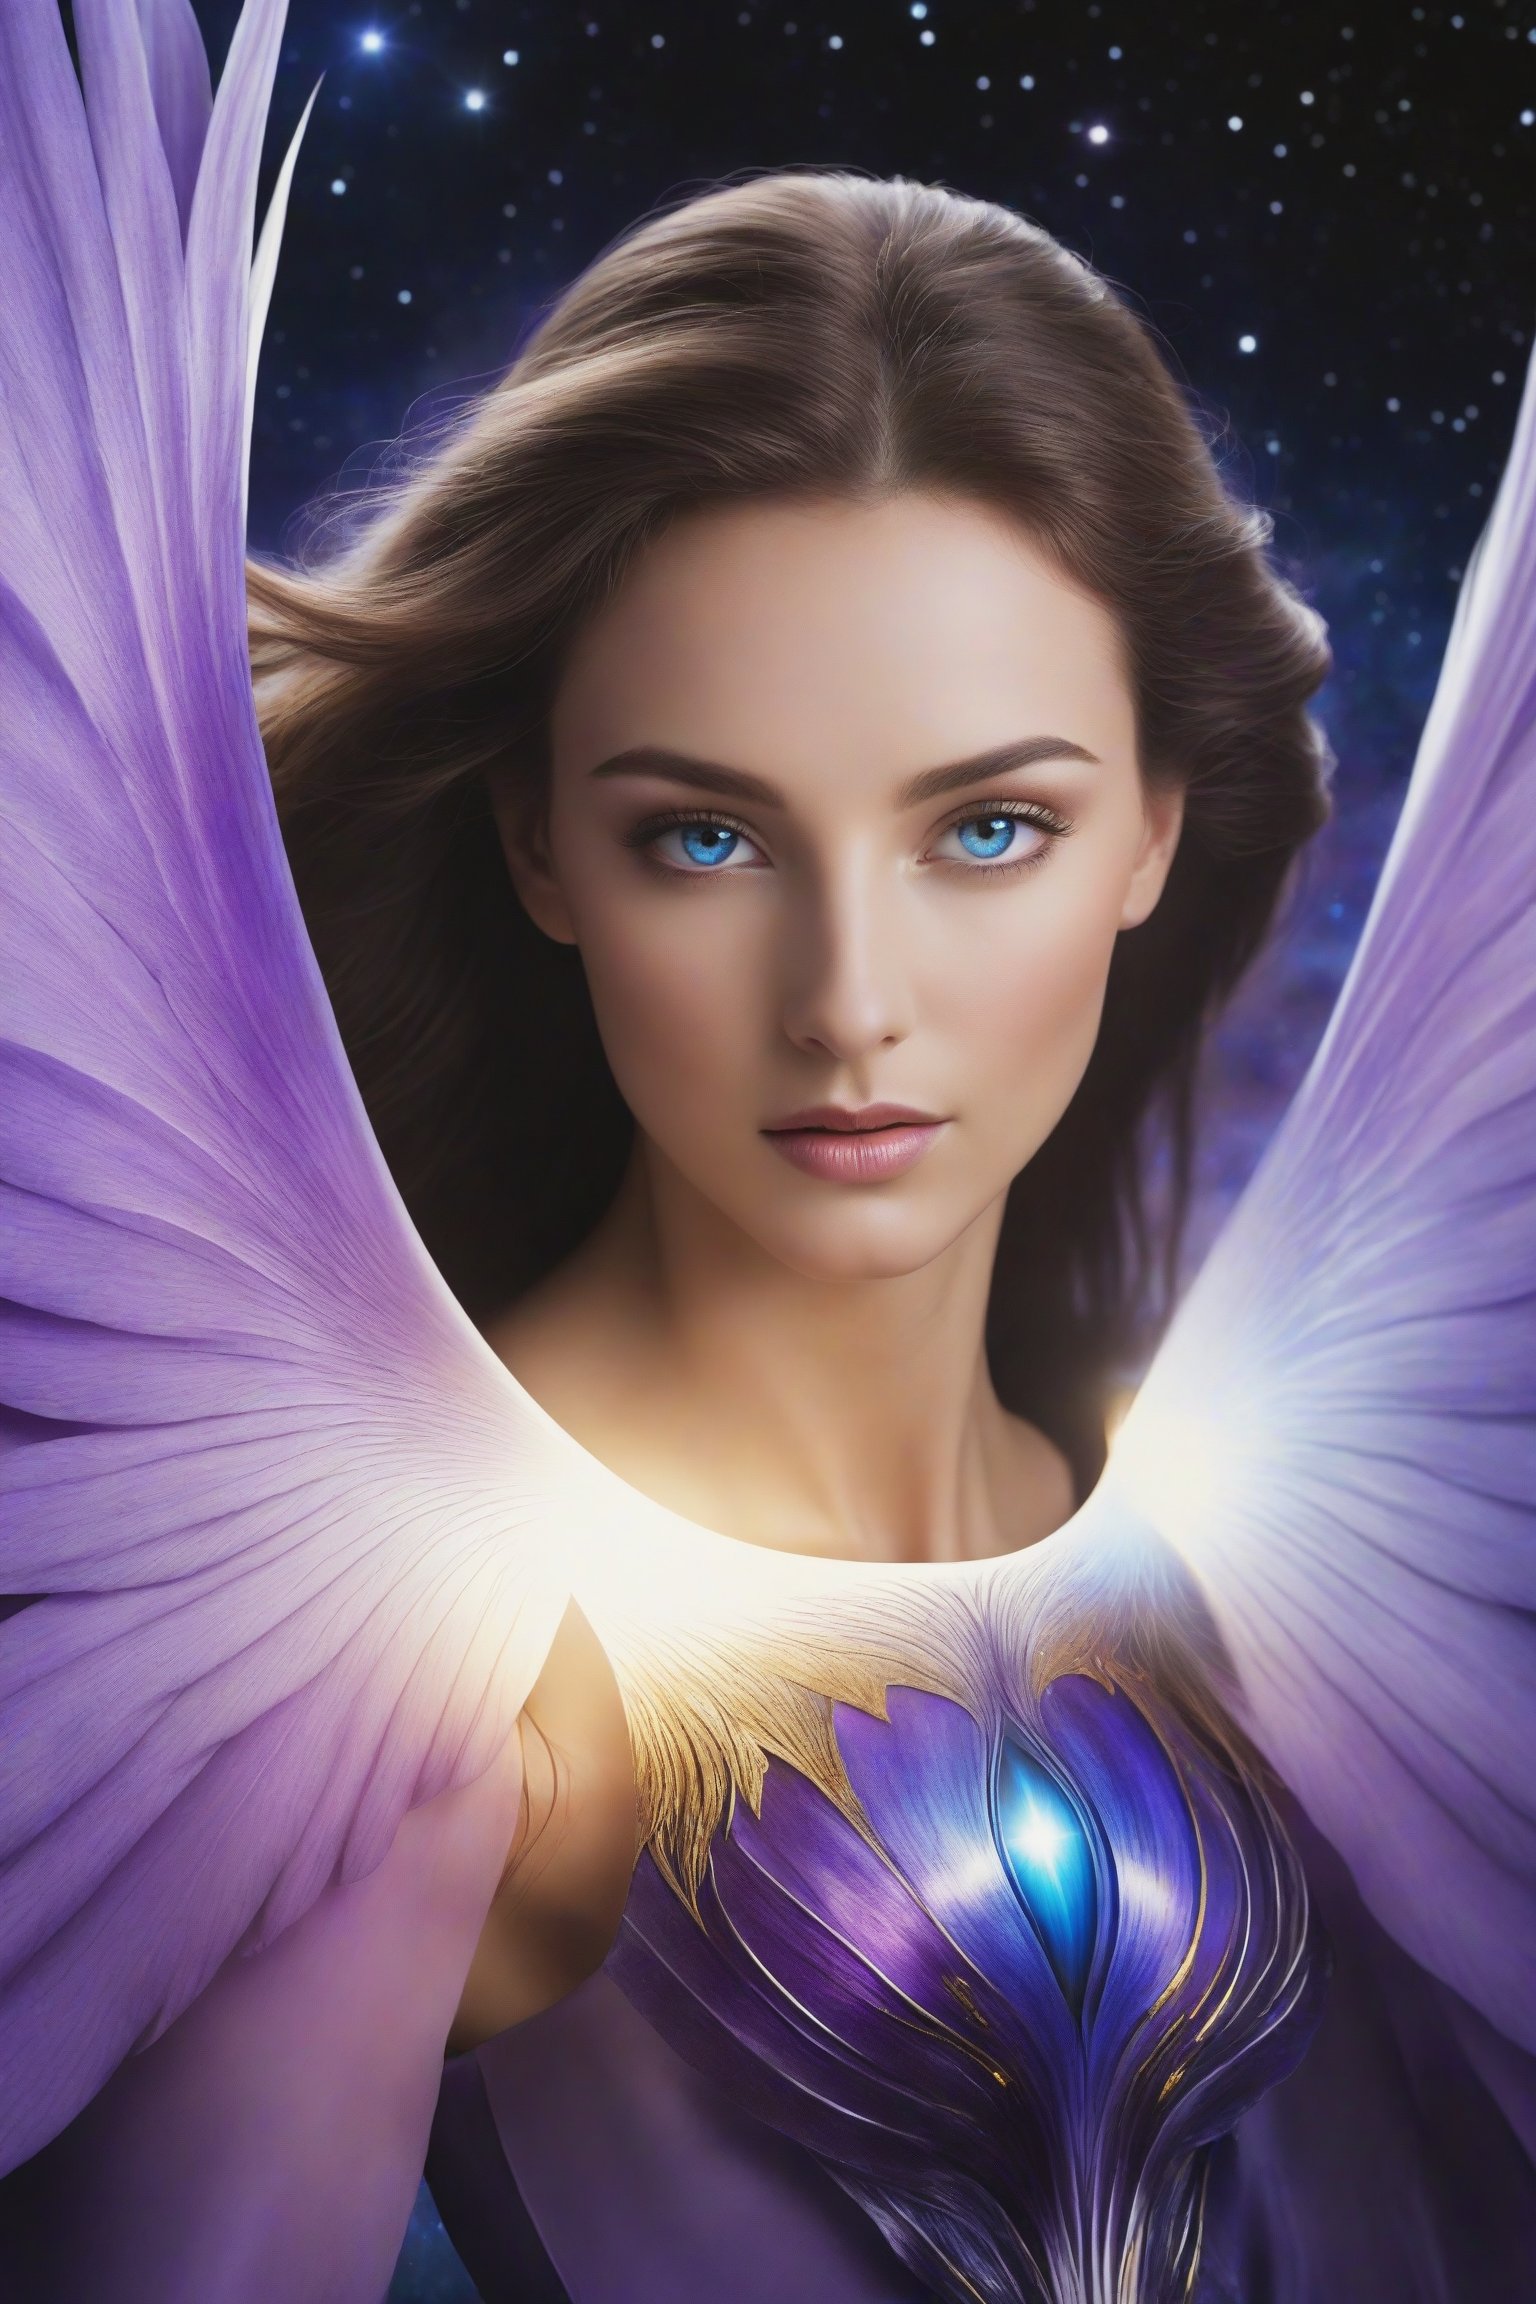 Archangel Iris of Ancient Skies: Each iris seems to have a celestial eye at its center, observing the ancient secrets of the skies while swaying gracefully in cosmic winds.